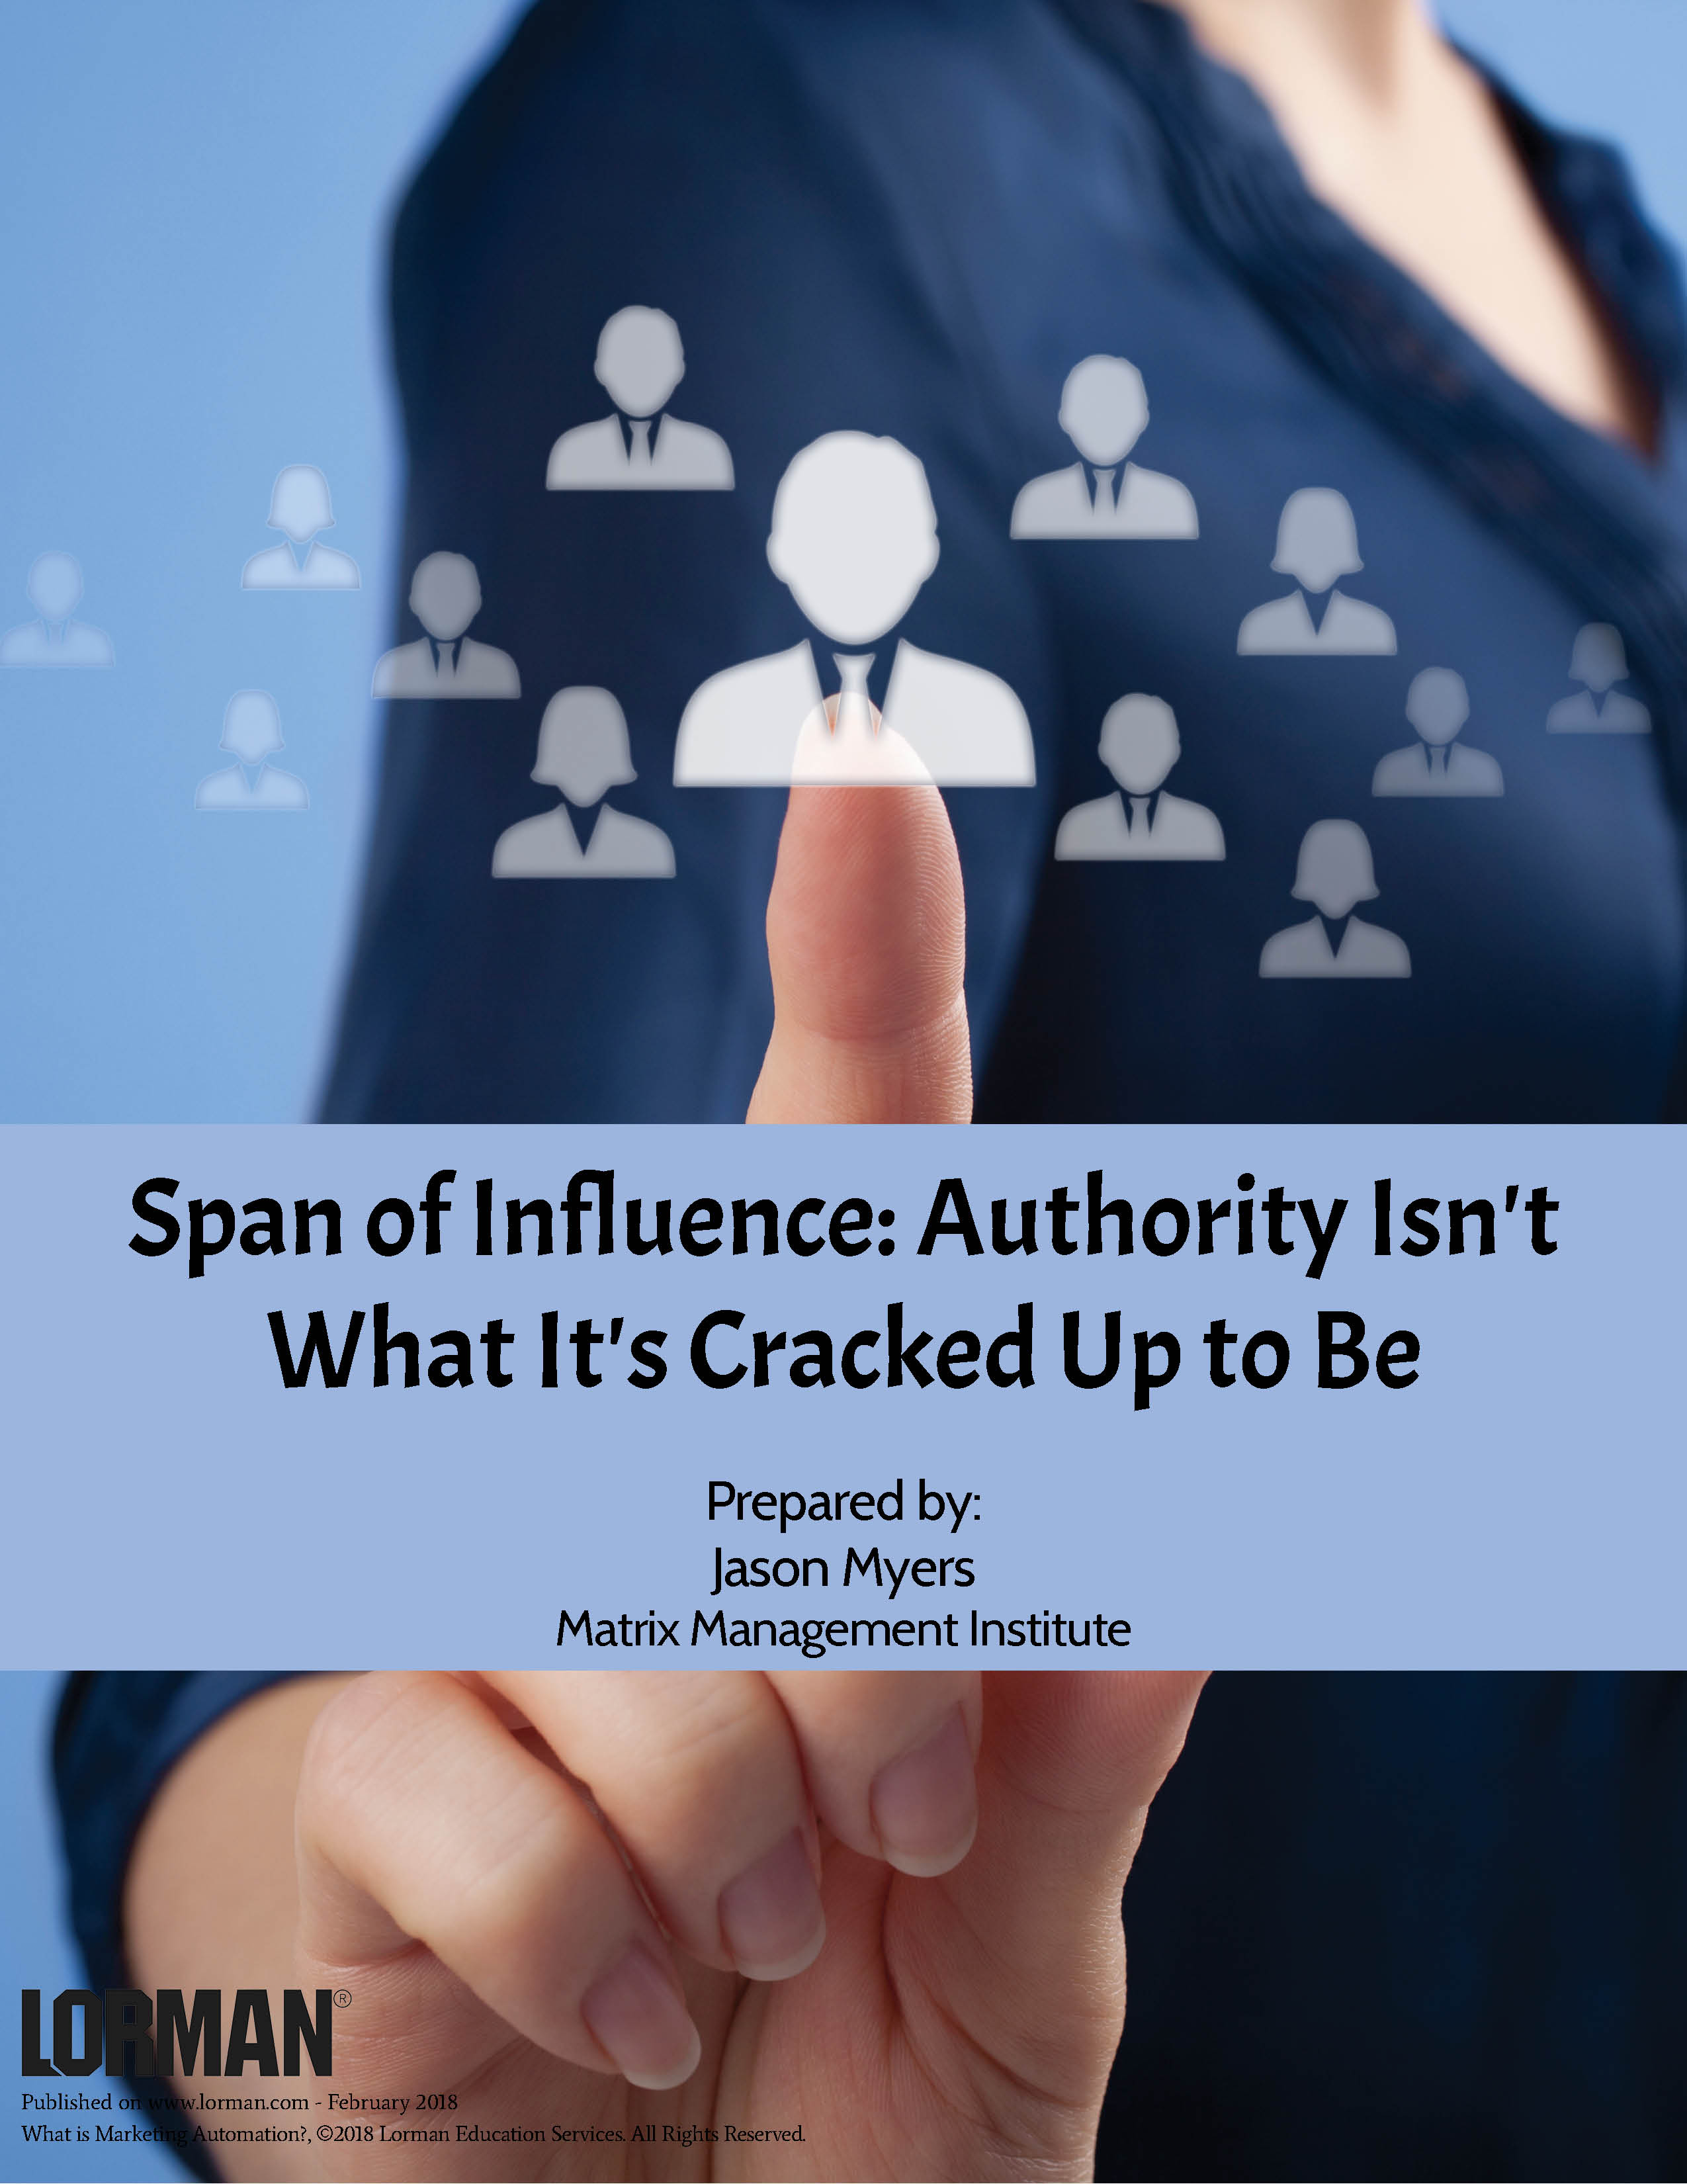 Span of Influence: Authority Isn't What It's Cracked Up to Be